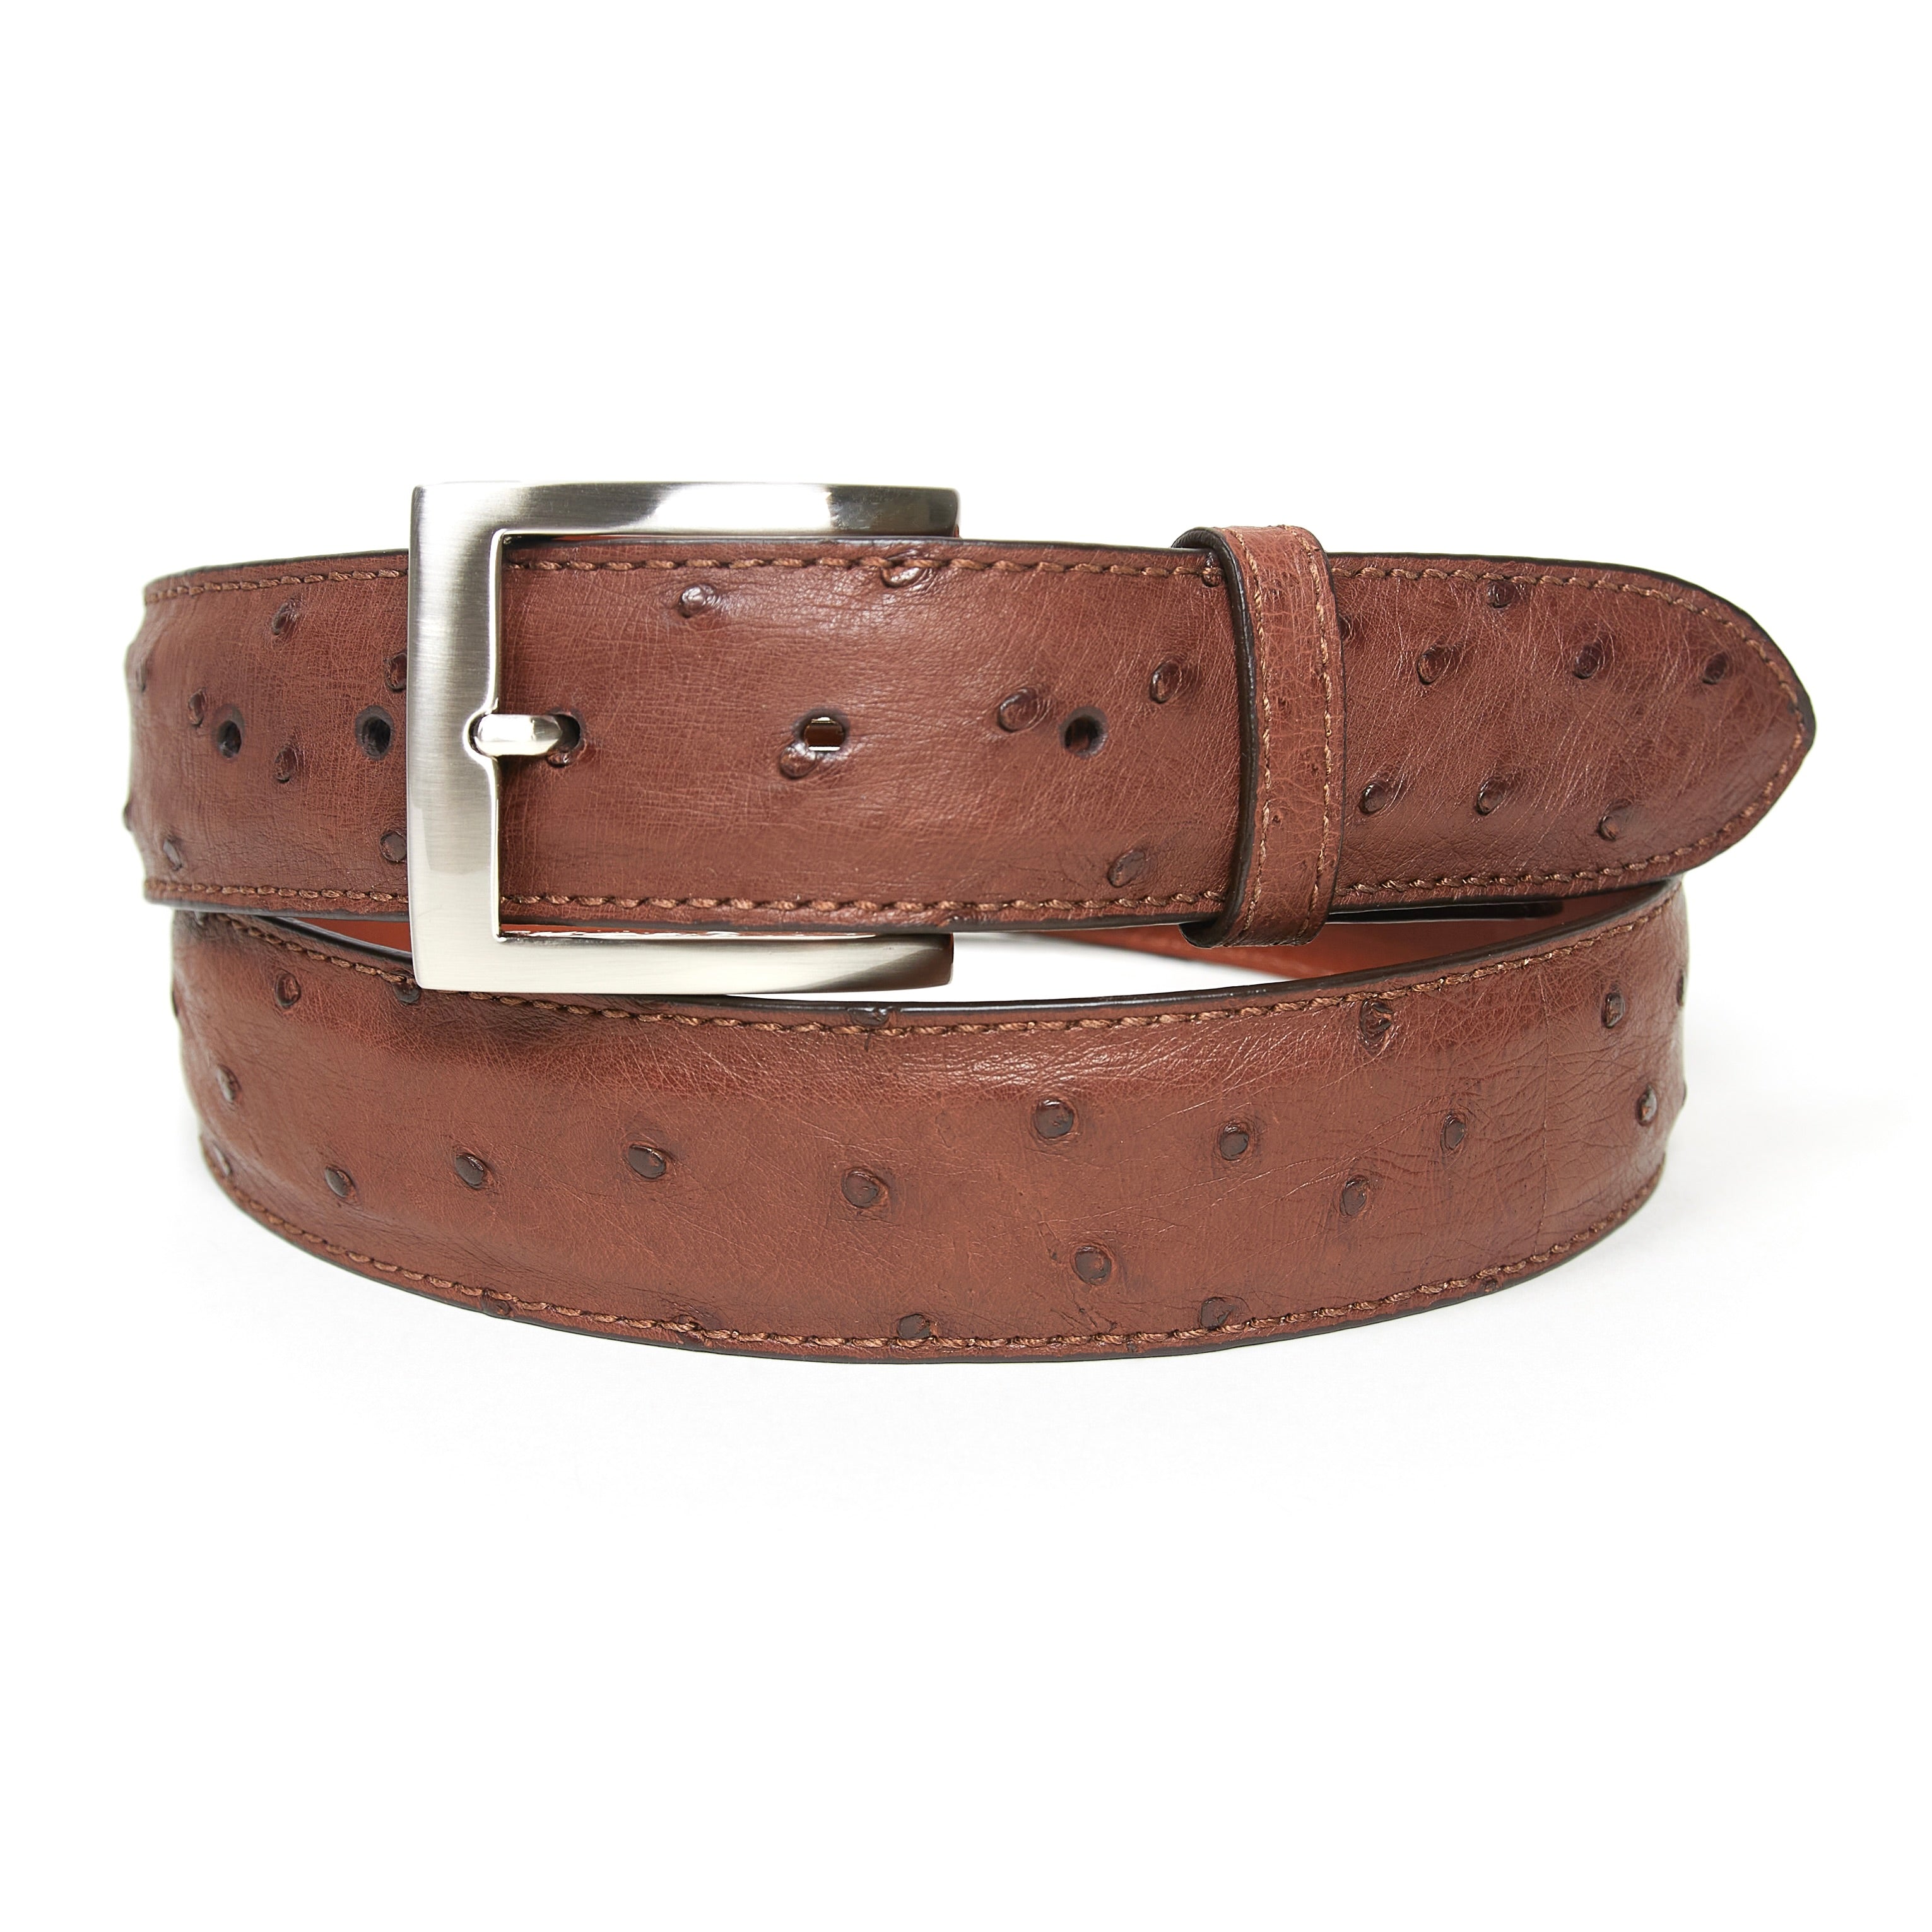 Ostrich leather belts